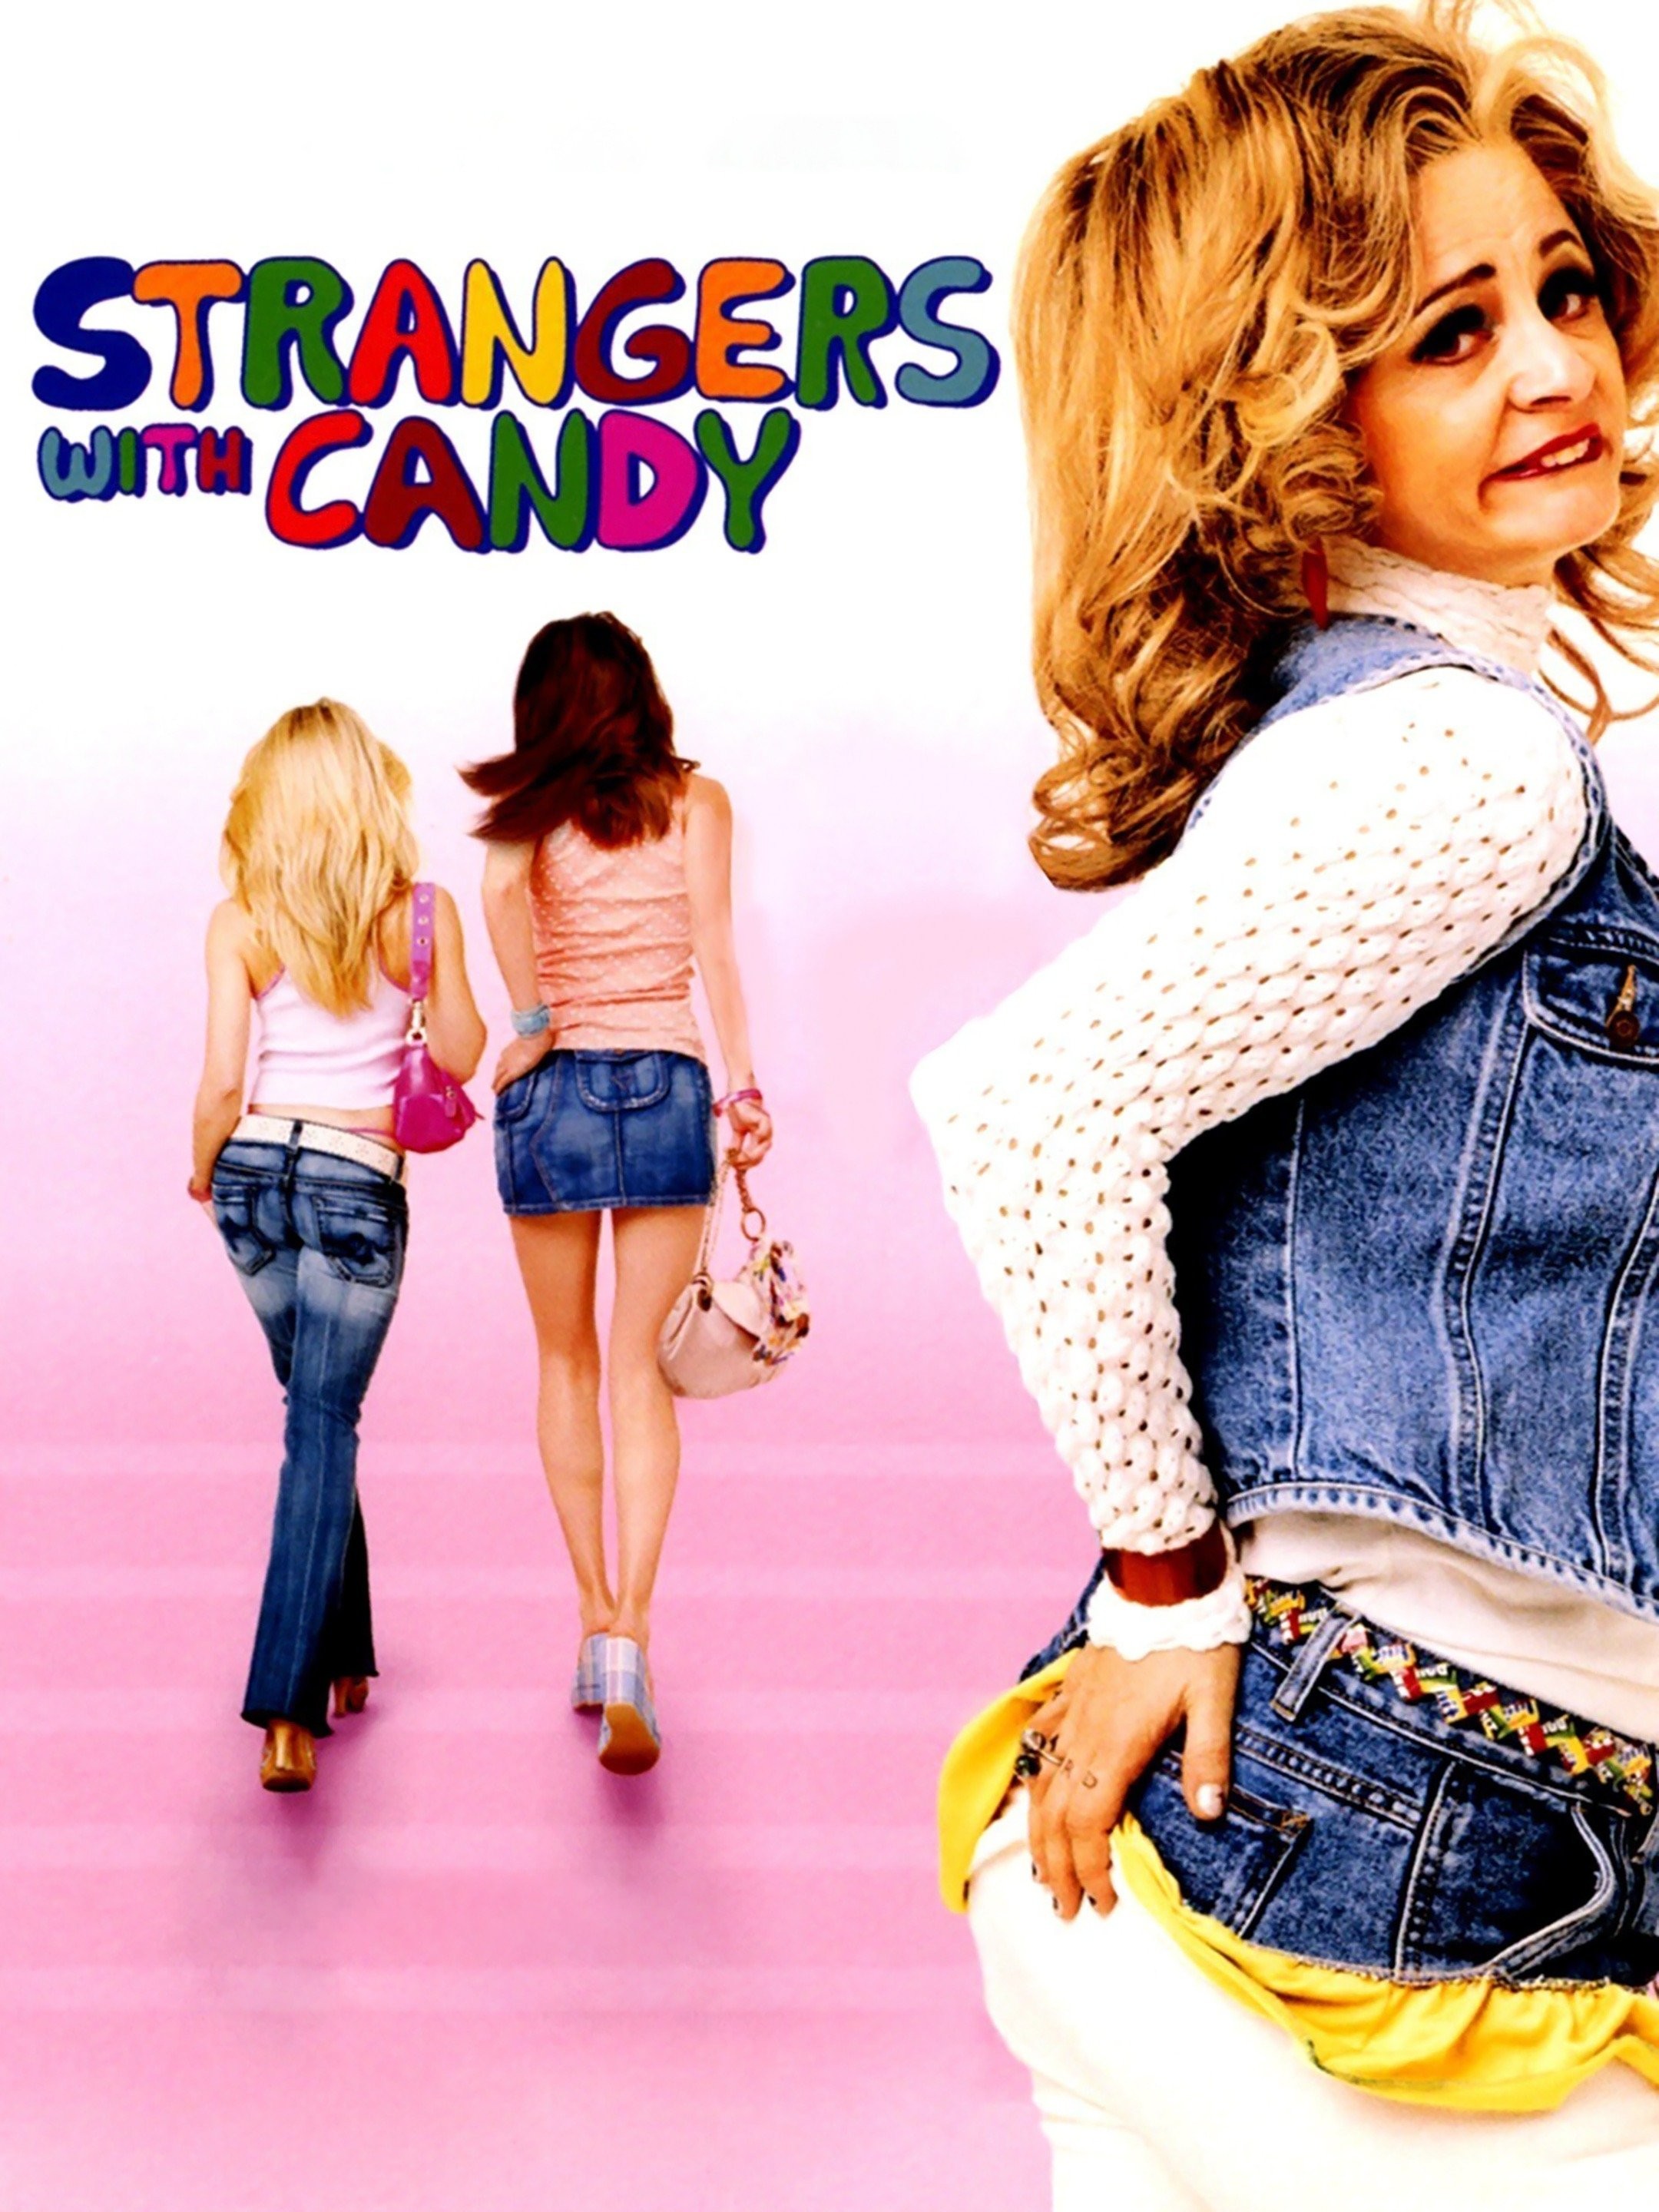 Strangers With Candy - Review - Movies - The New York Times